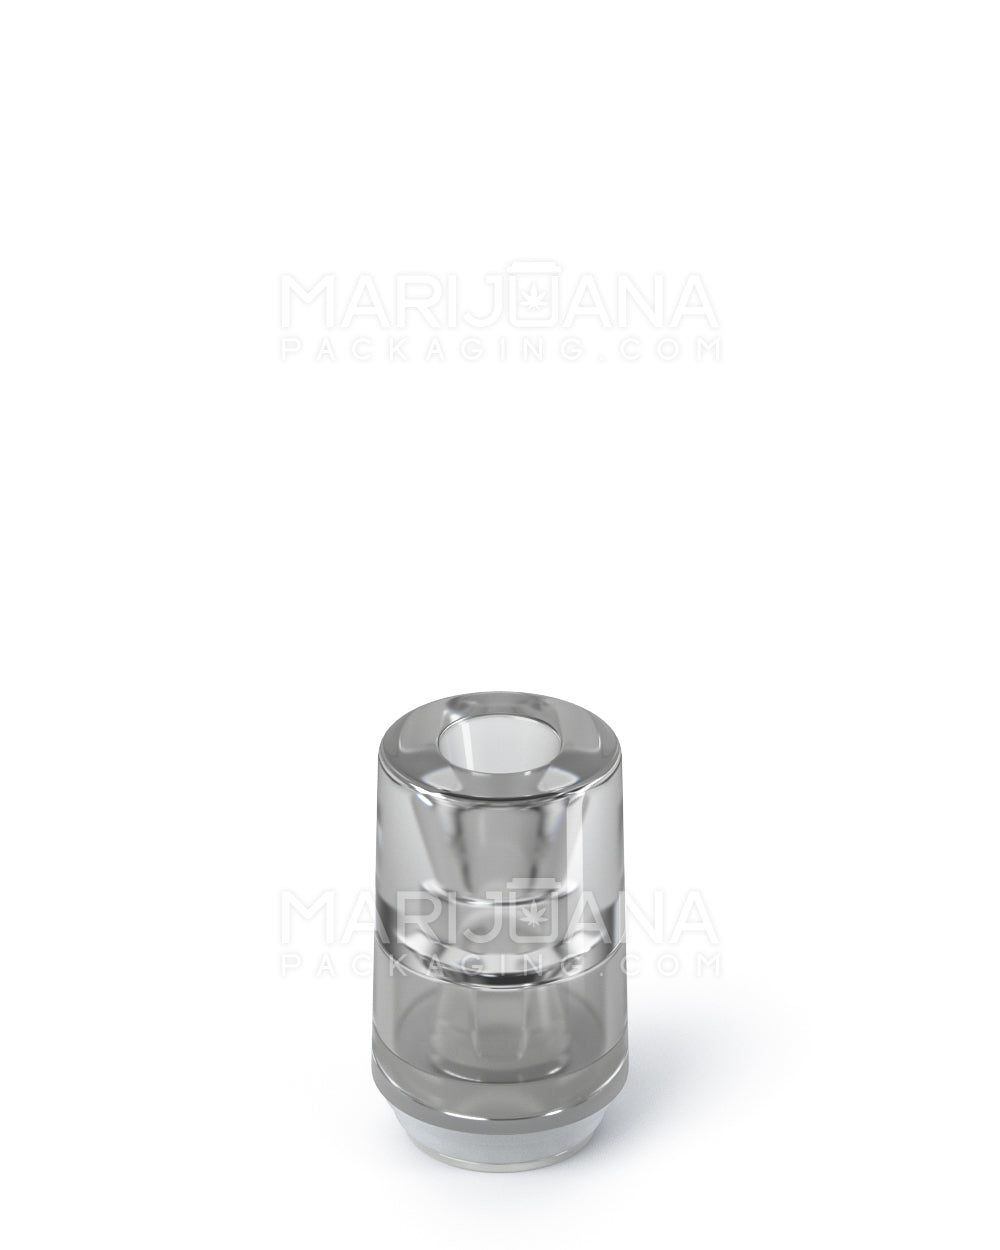 RAE | Round Vape Mouthpiece for Hand Press Plastic Cartridges | Clear Plastic - Hand Press - 400 Count